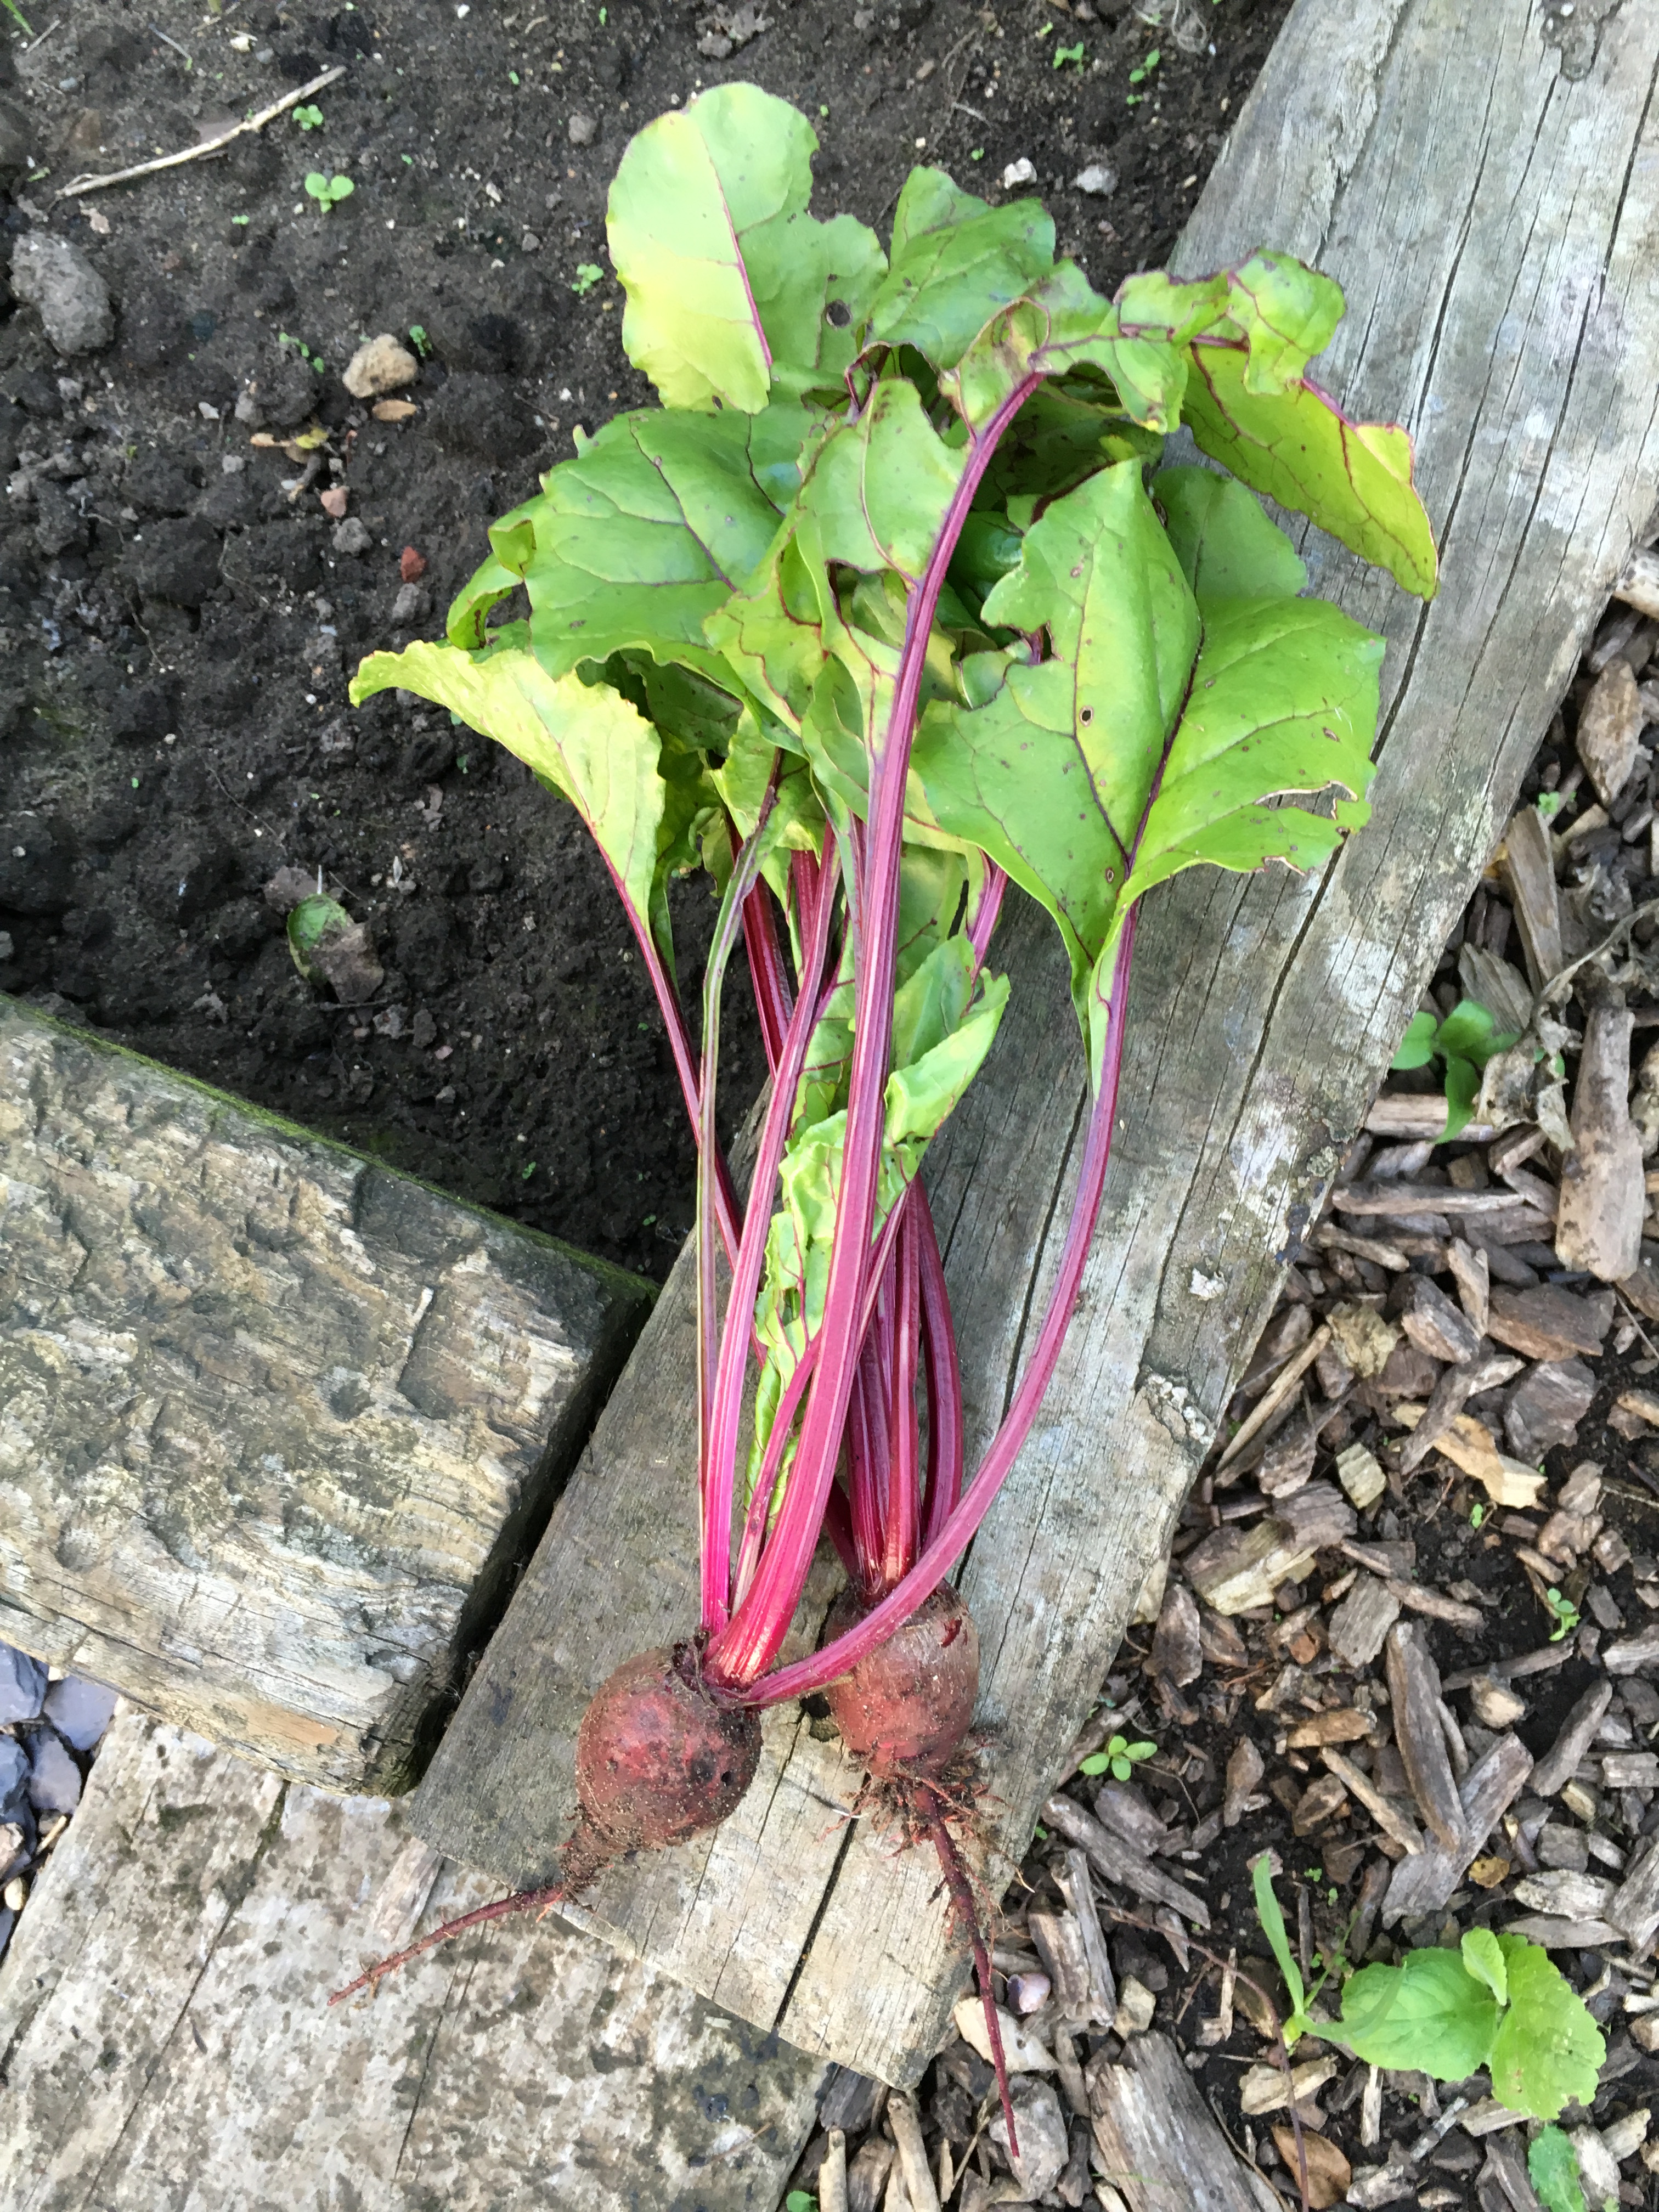 Baby beetroots